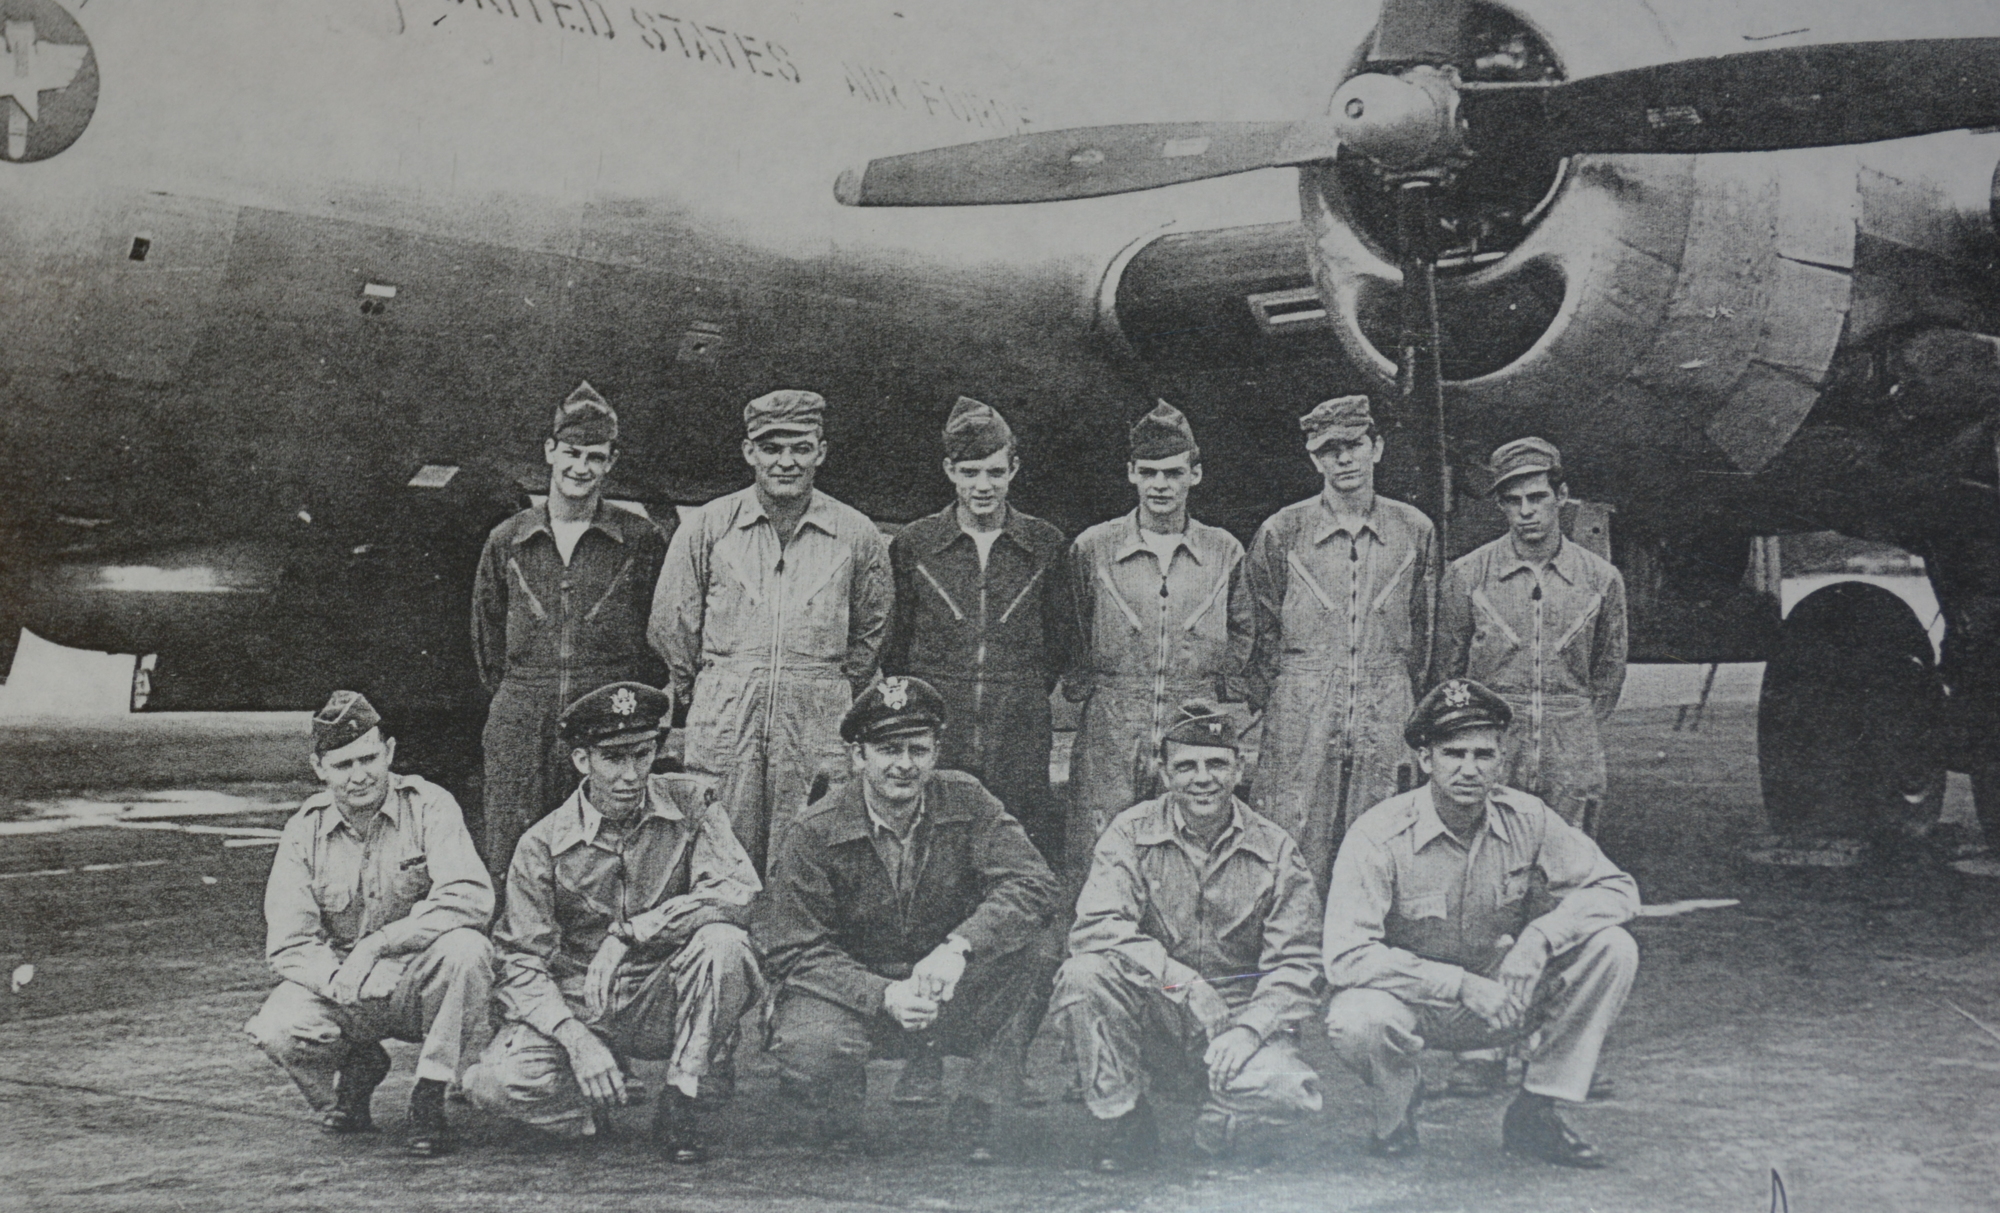 Eugene Vaadi, who is in the middle of the front row, and his crew in Korea.